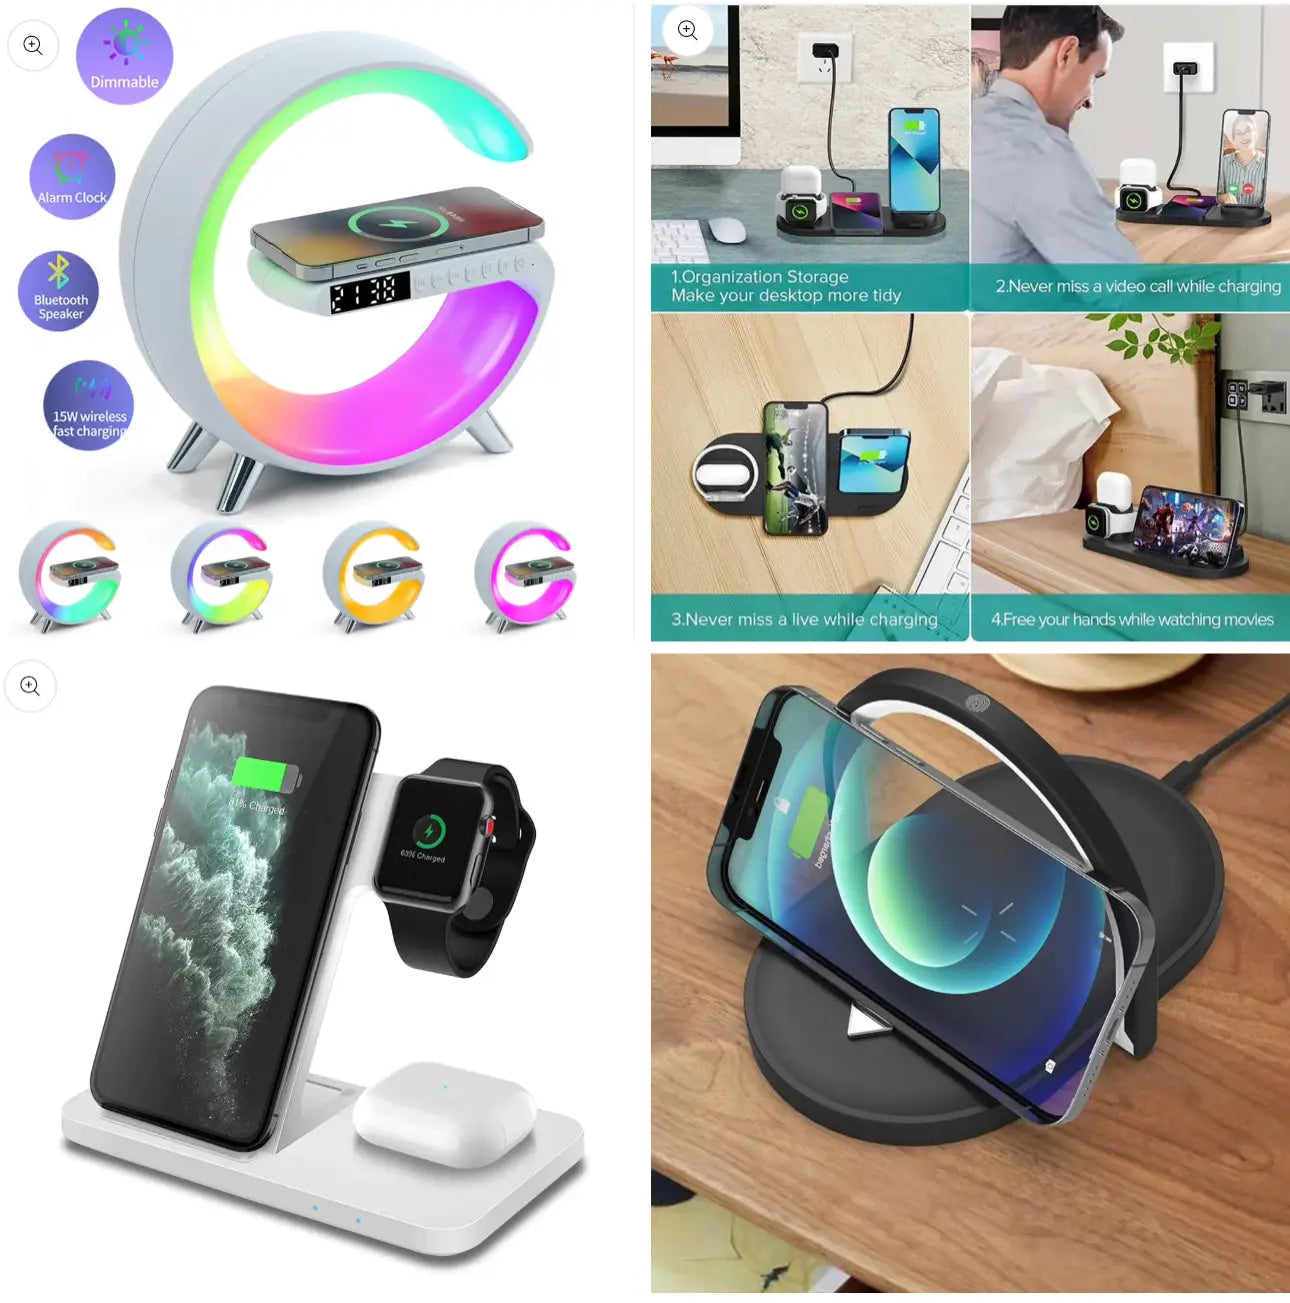 Top 3 Product Picks - Wireless Home & Office Chargers – Oz Marketplace